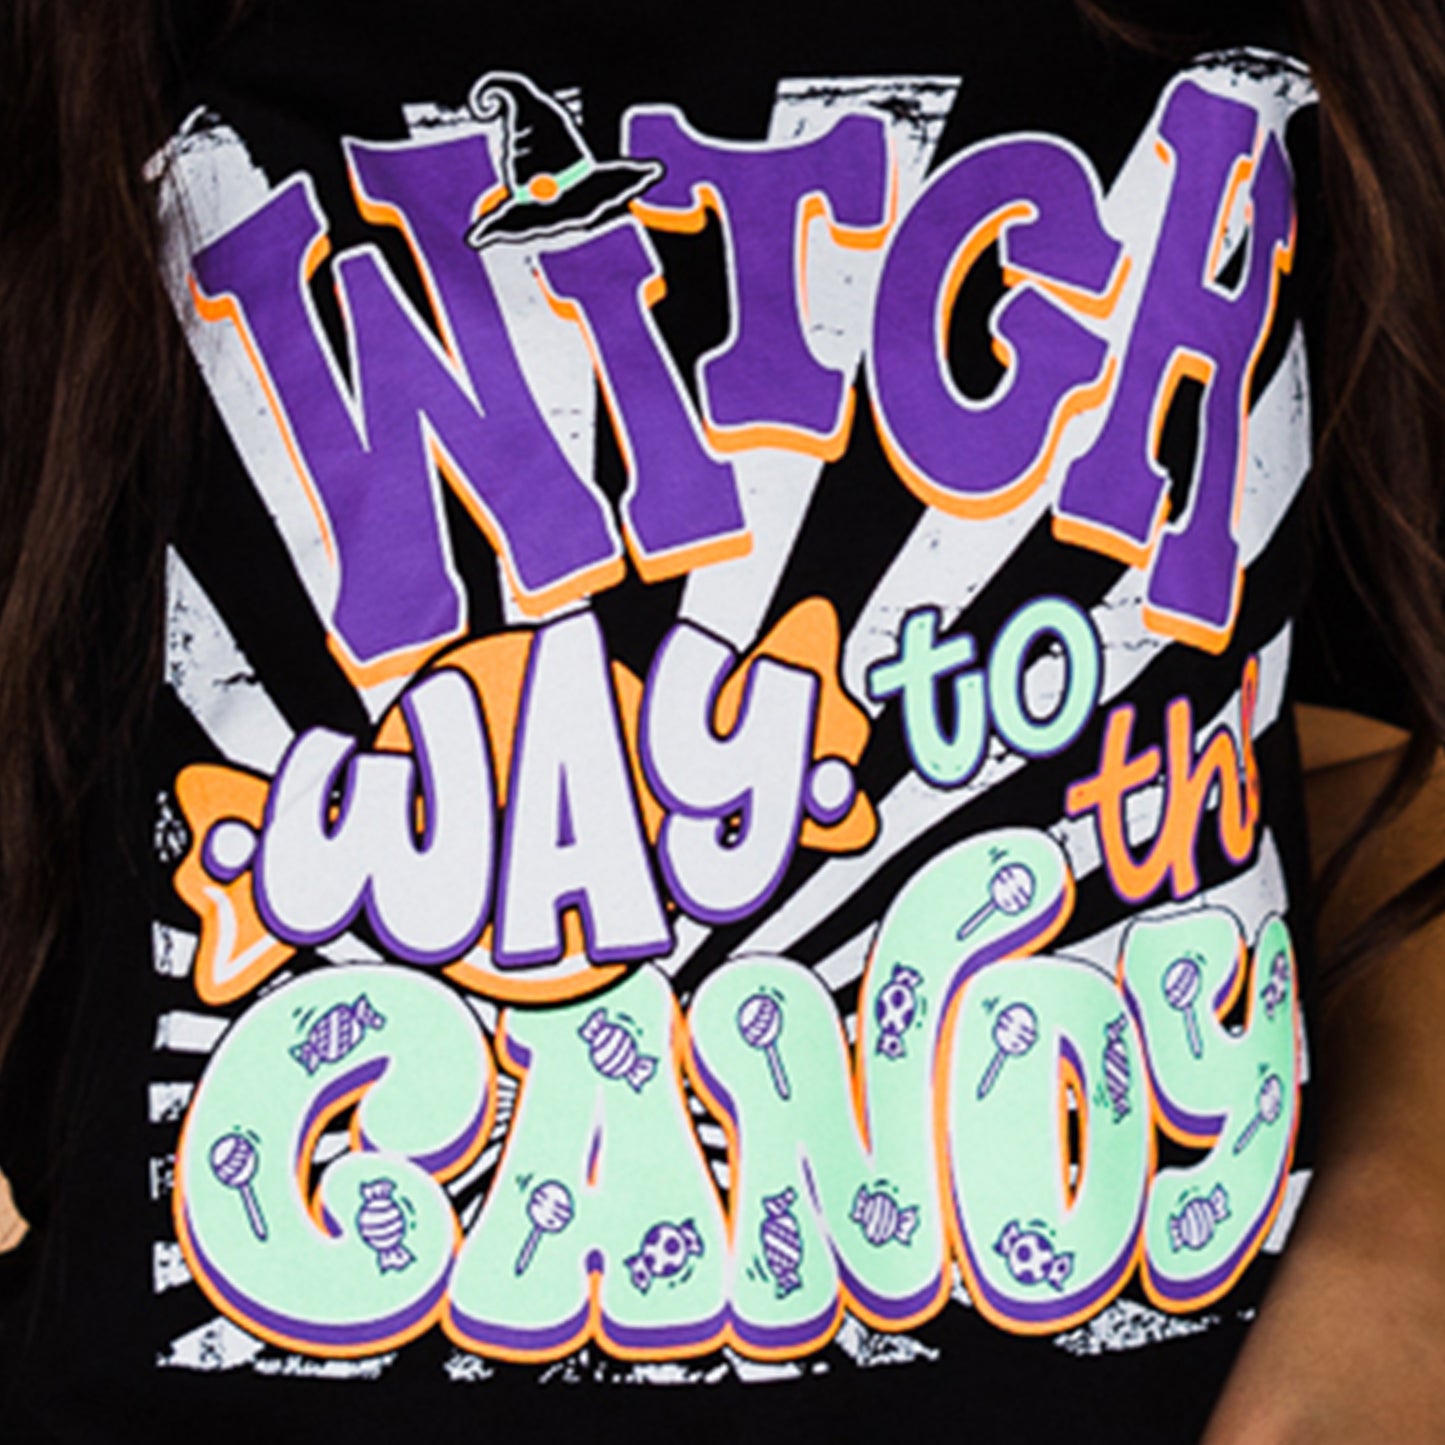 Witch Way to the Candy - Halloween Tee